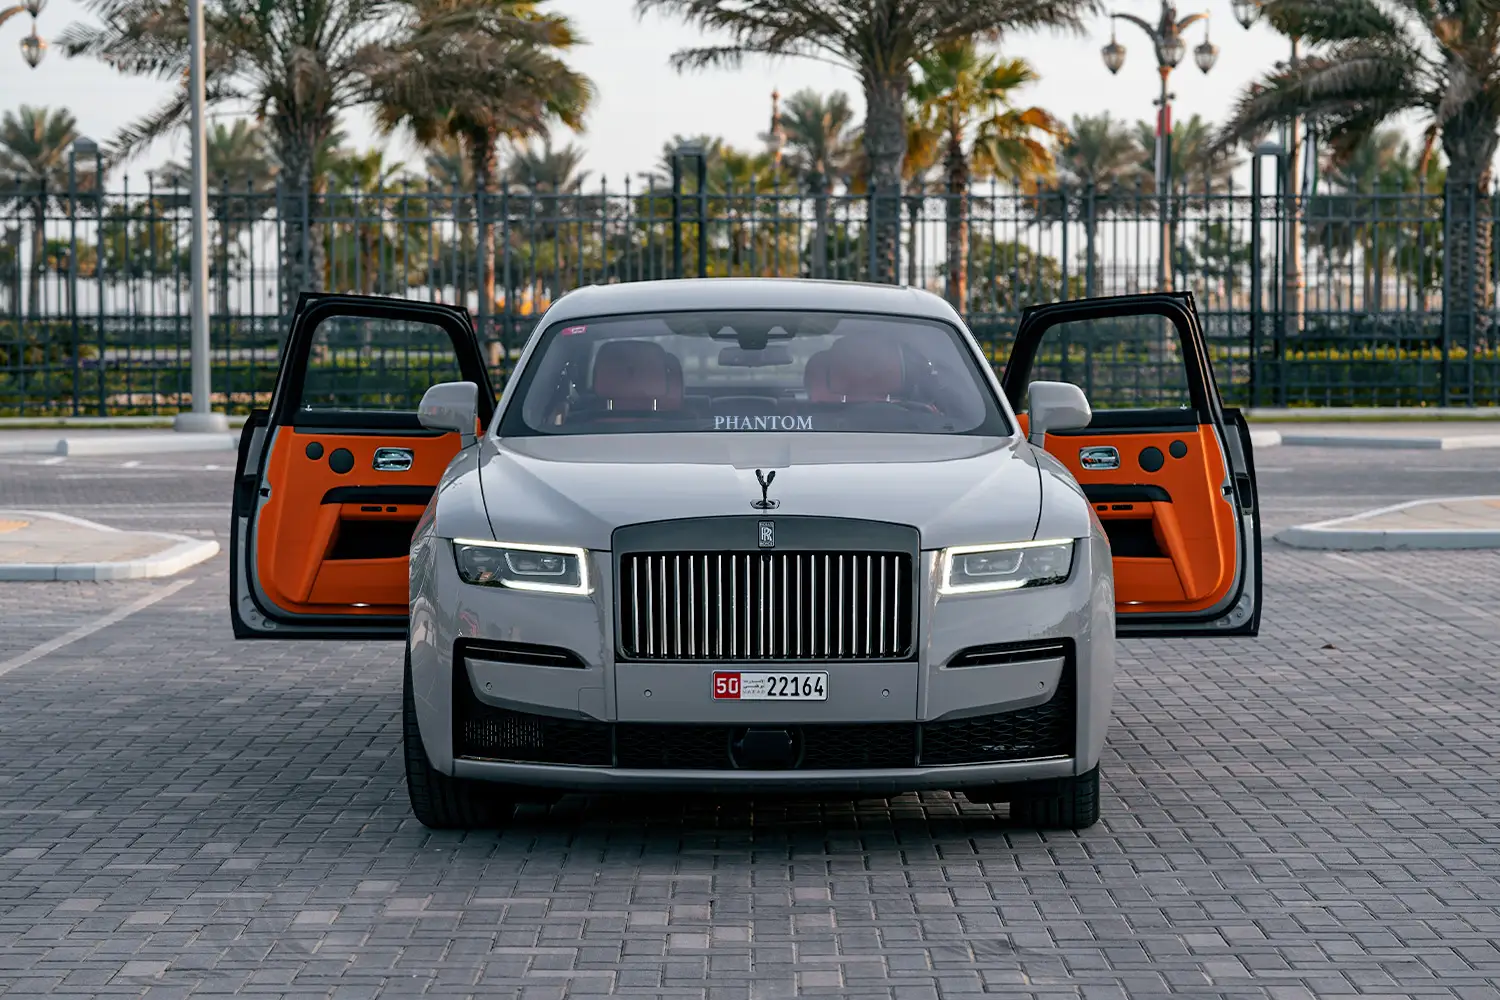 TwoTone RollRoyce Ghost Extended Is Companys First Bespoke Car From Dubai